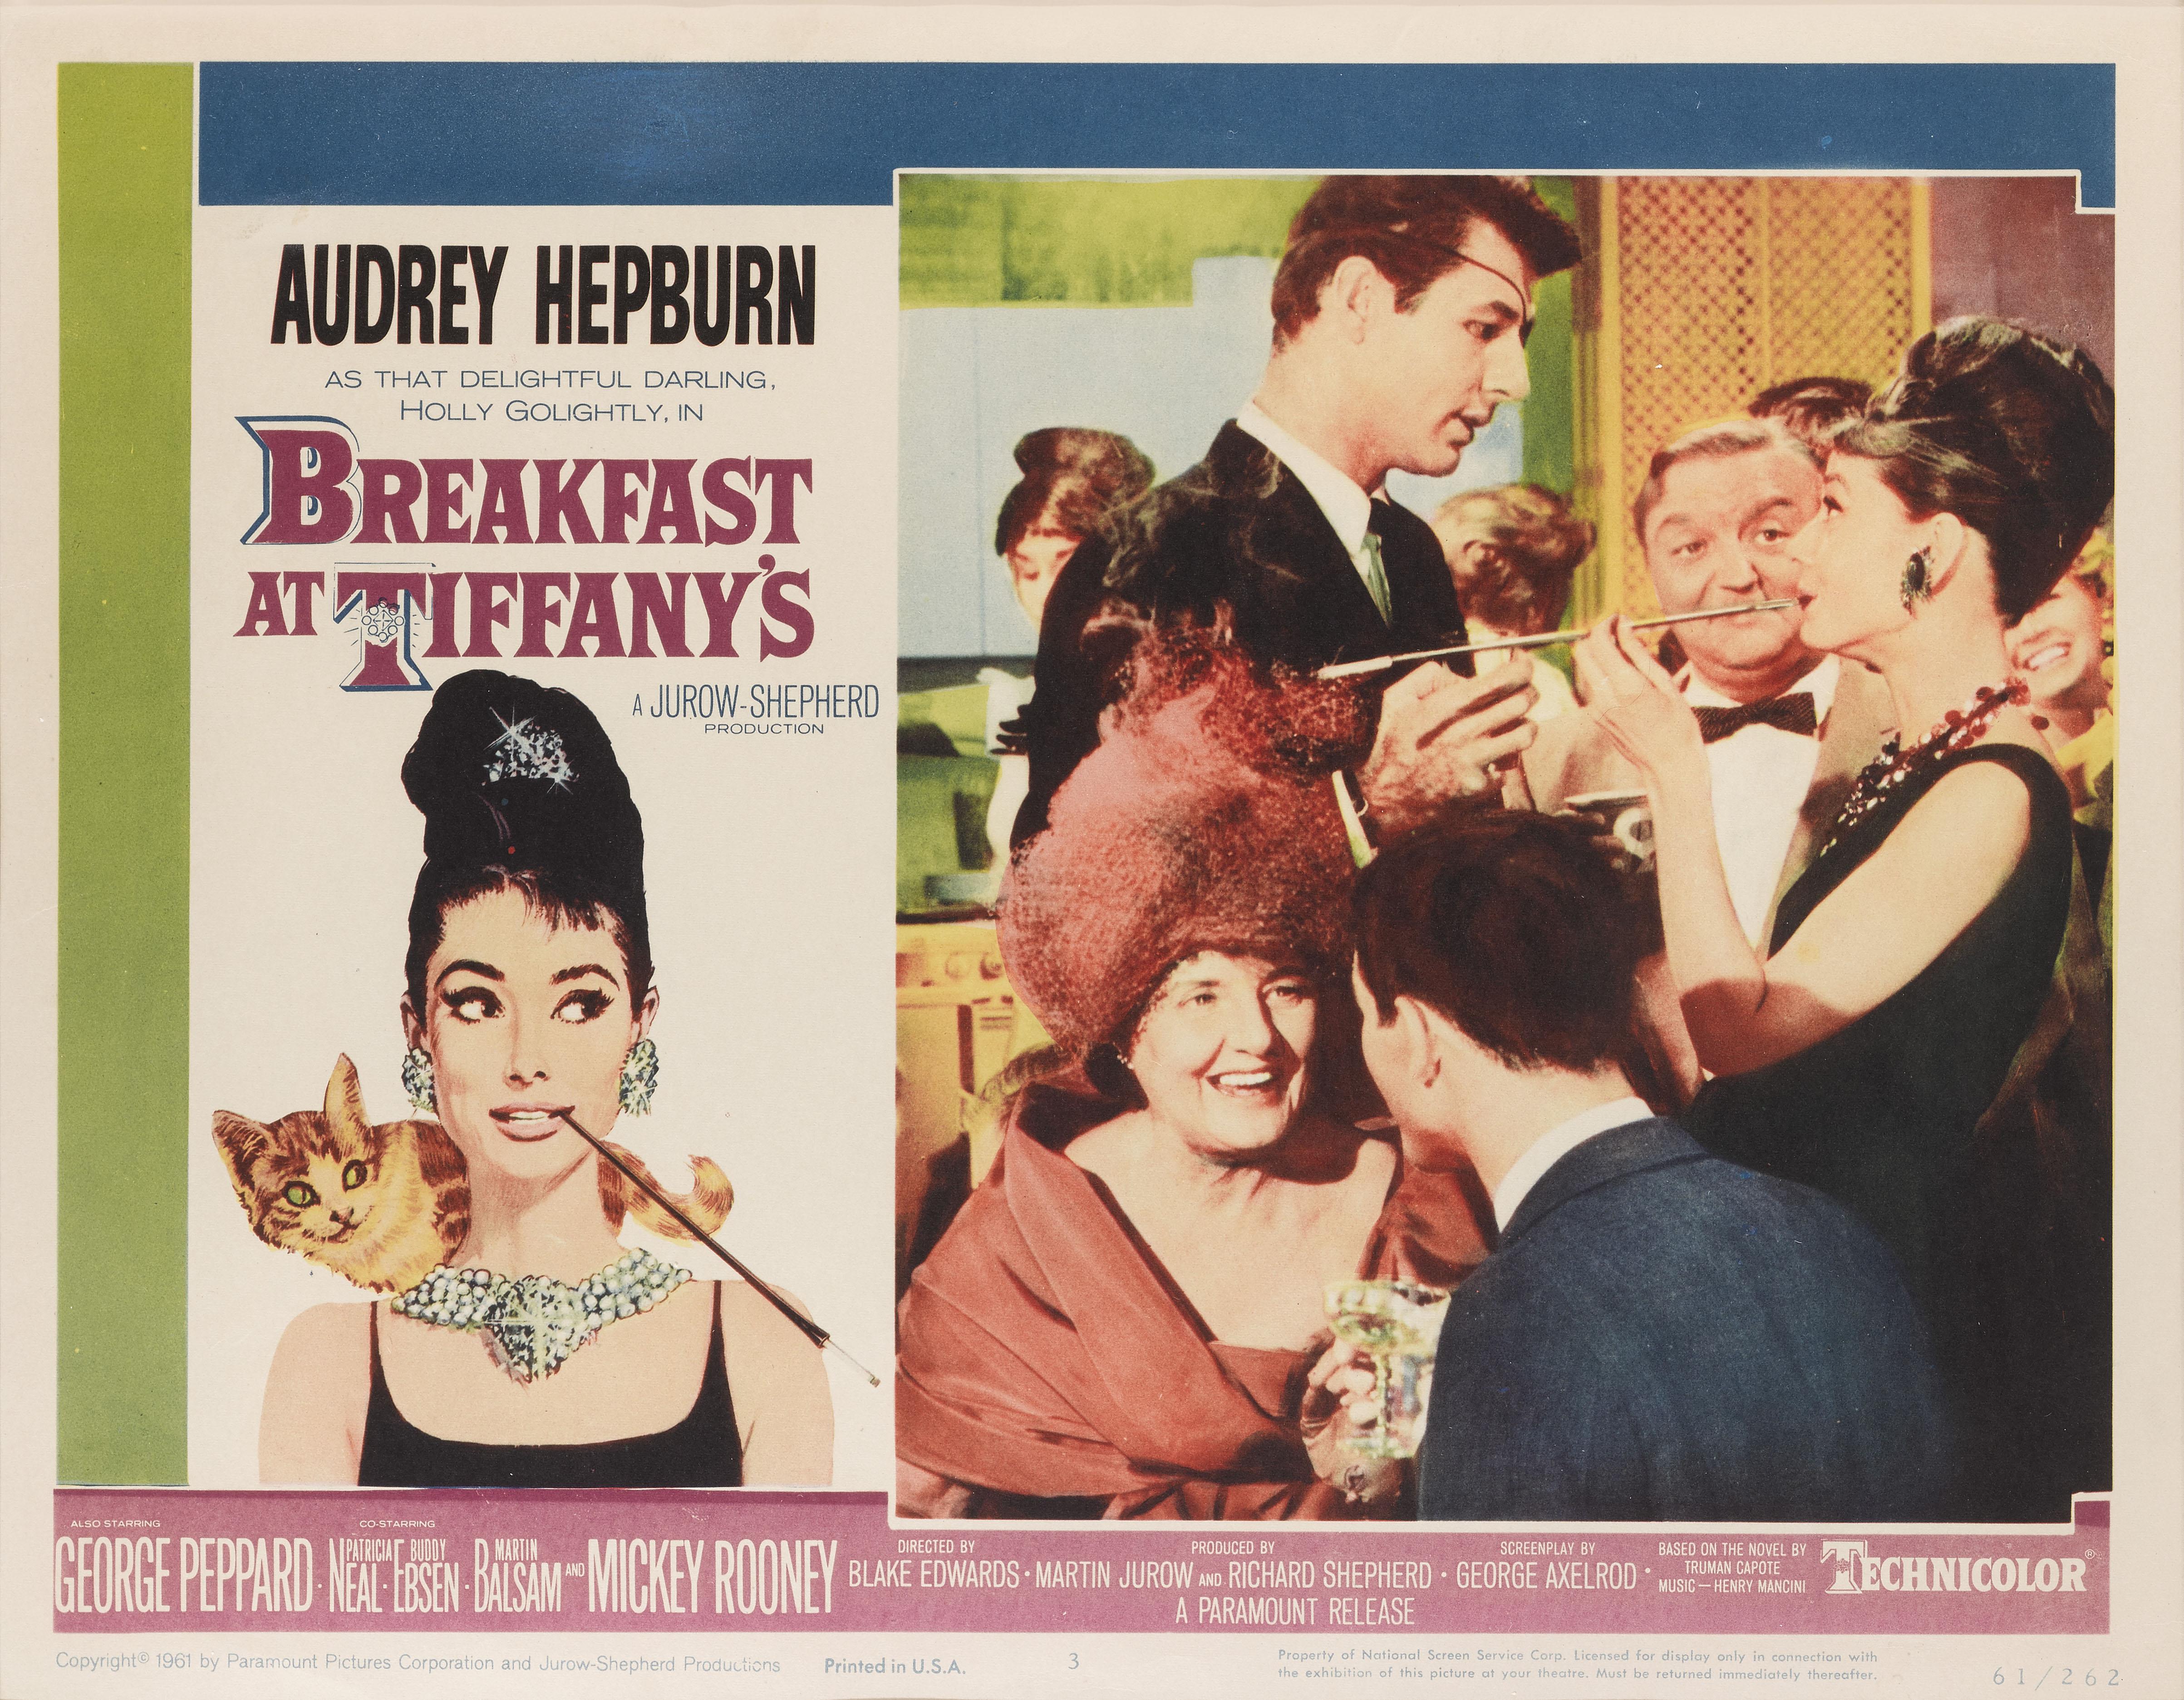 Original US Lobby card number 3 for Audrey Hepburn and George Peppard's, Classic, 1961 romance. This film was directed by Blake Edwards.
The piece is conservation framed with UV plexiglass in a Tulip wood frame with acid free card mounts. The size